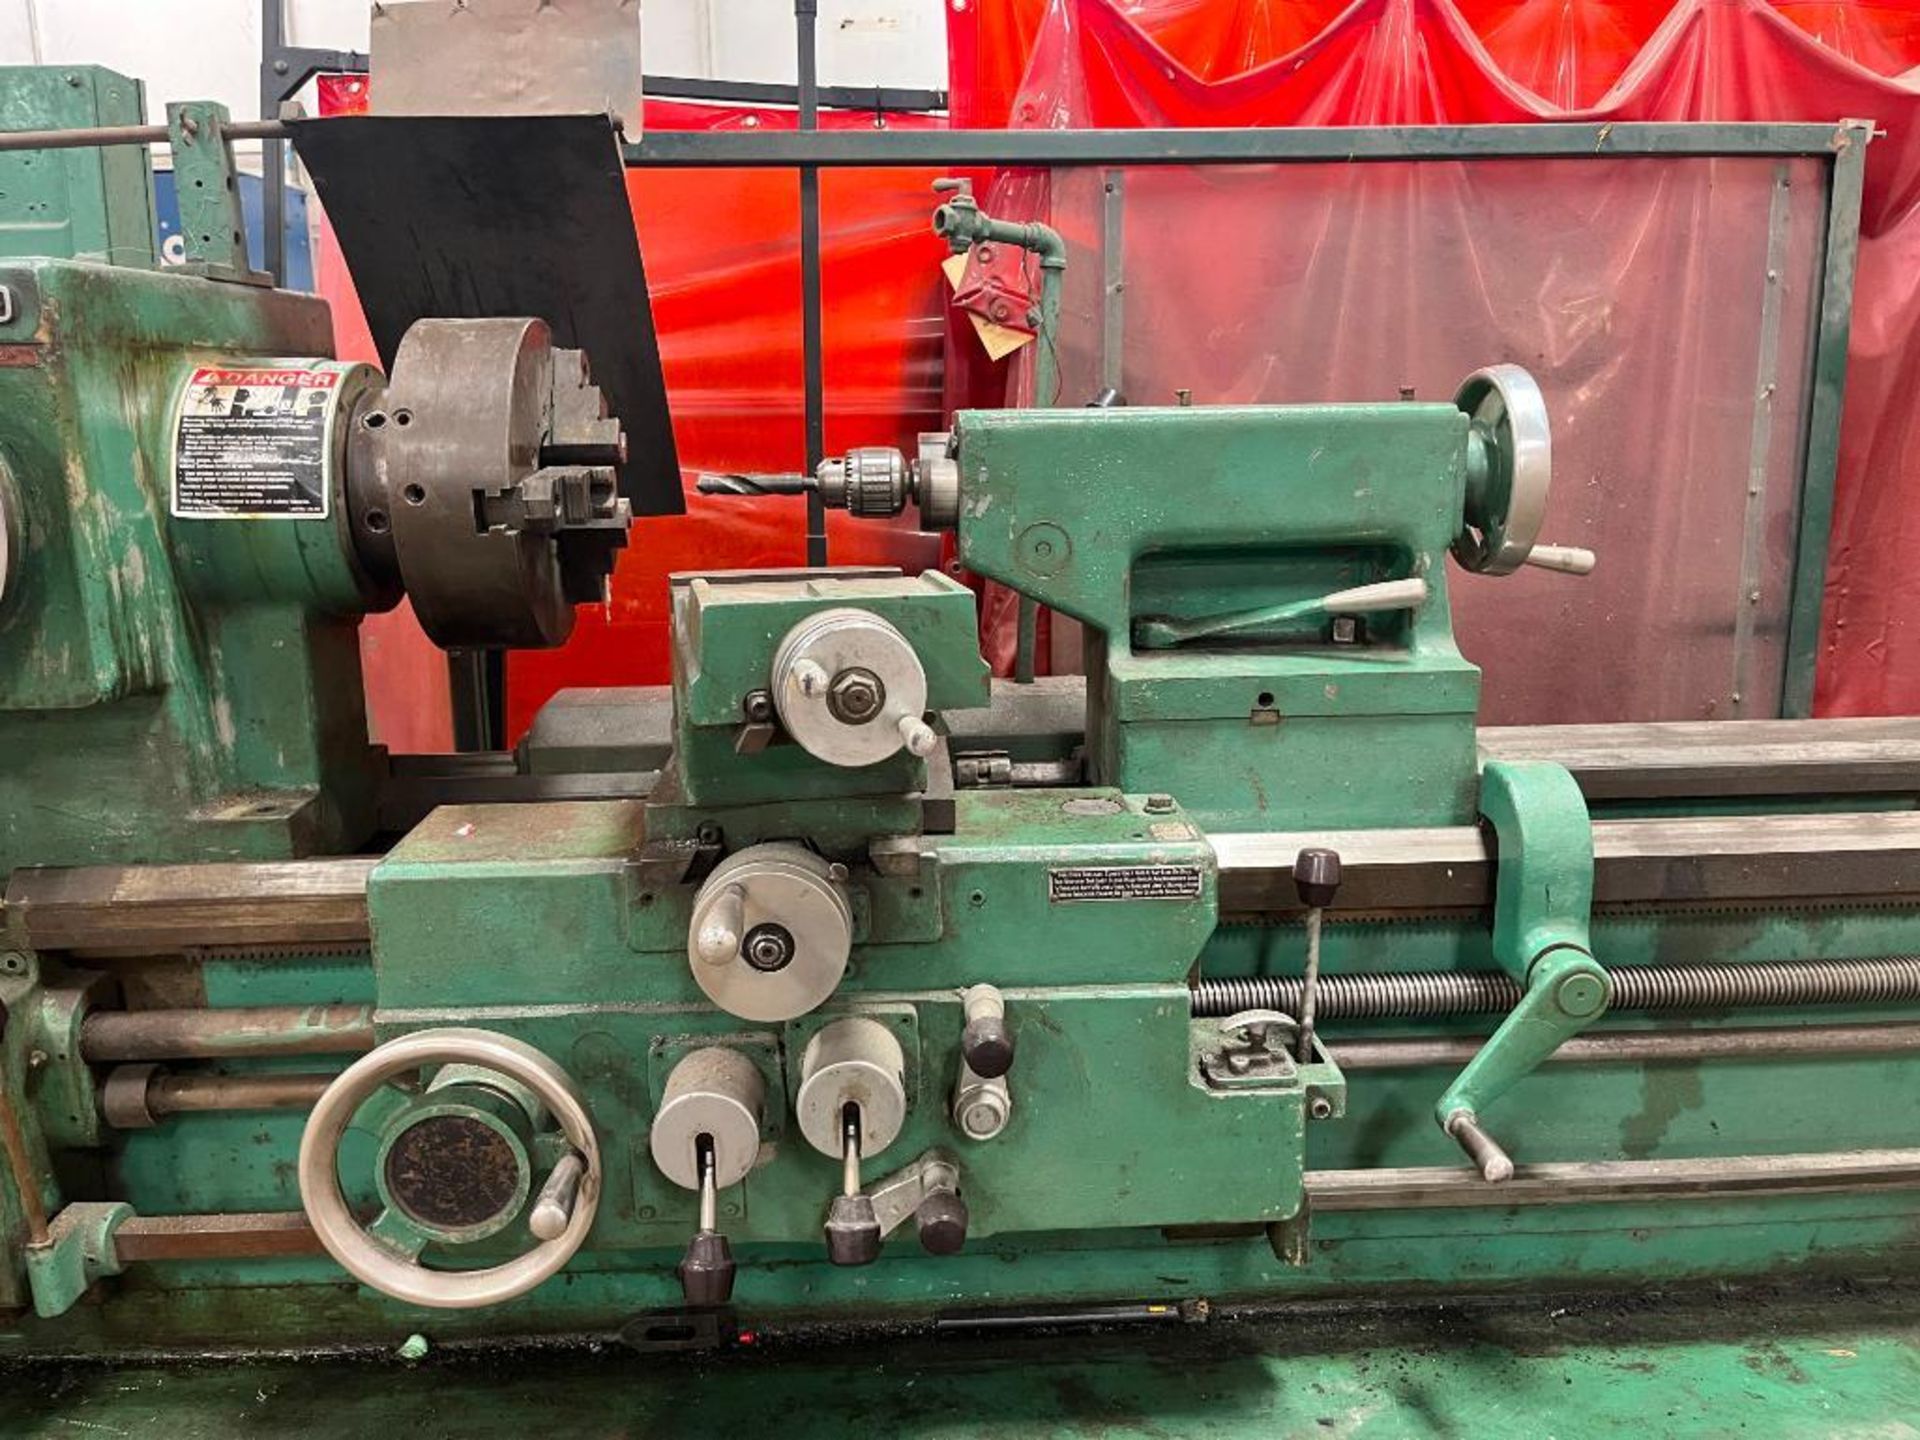 Lodge & Shipley AVS Engine Lathe, 24" x 72" with 12" 3 Jaw Chuck, Tailstock Steady Rest, Model 2010/ - Image 3 of 12